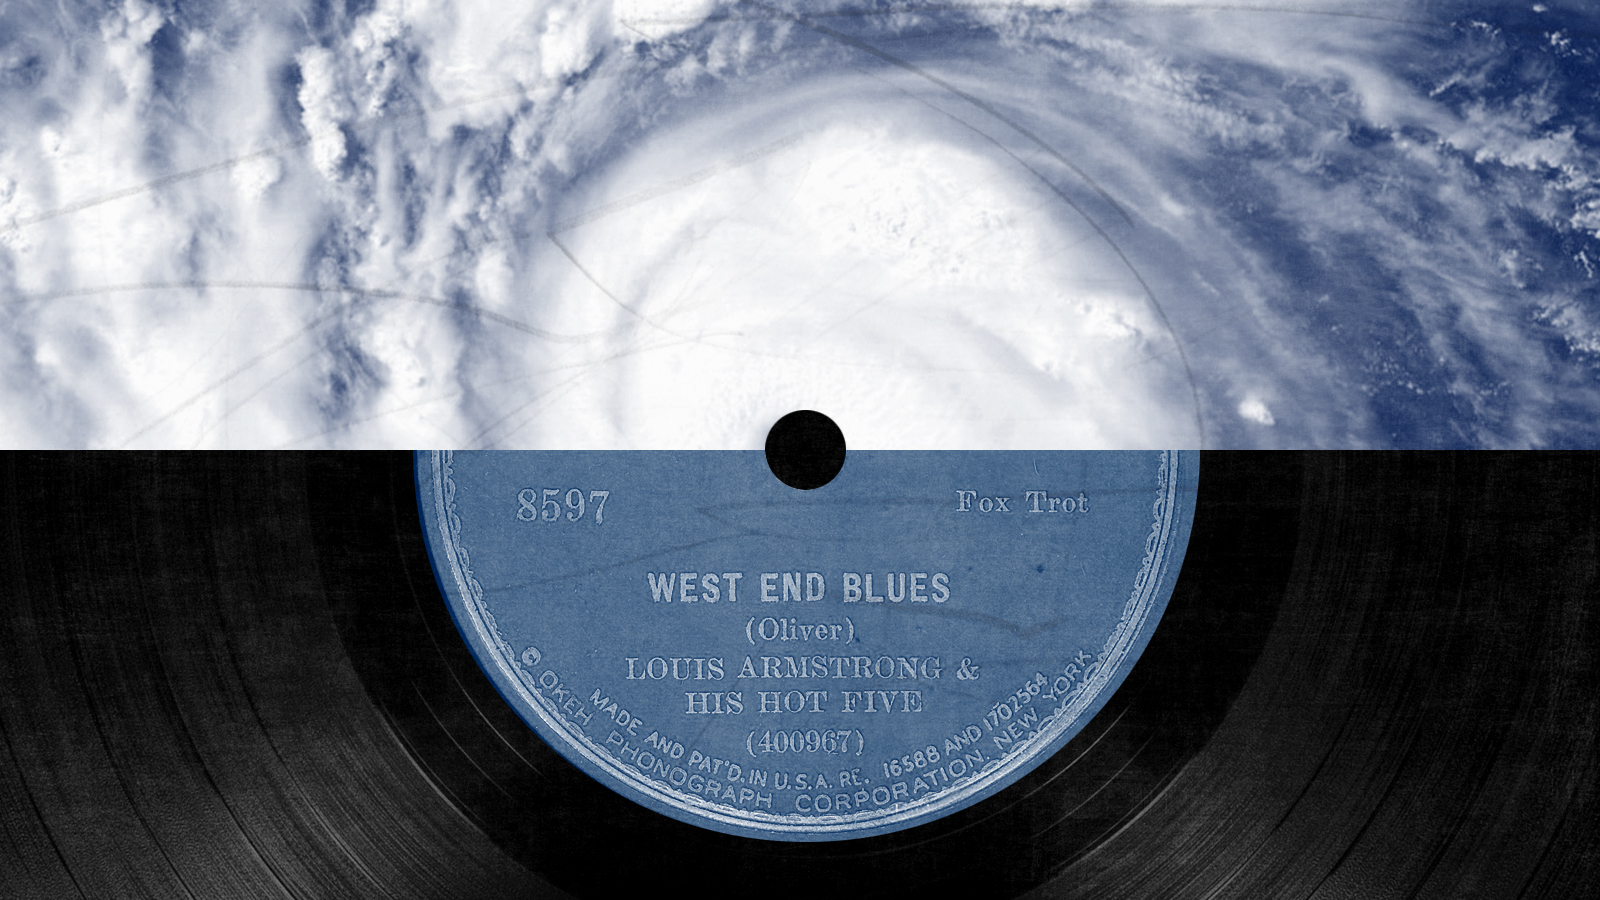 A hurricane and a record.